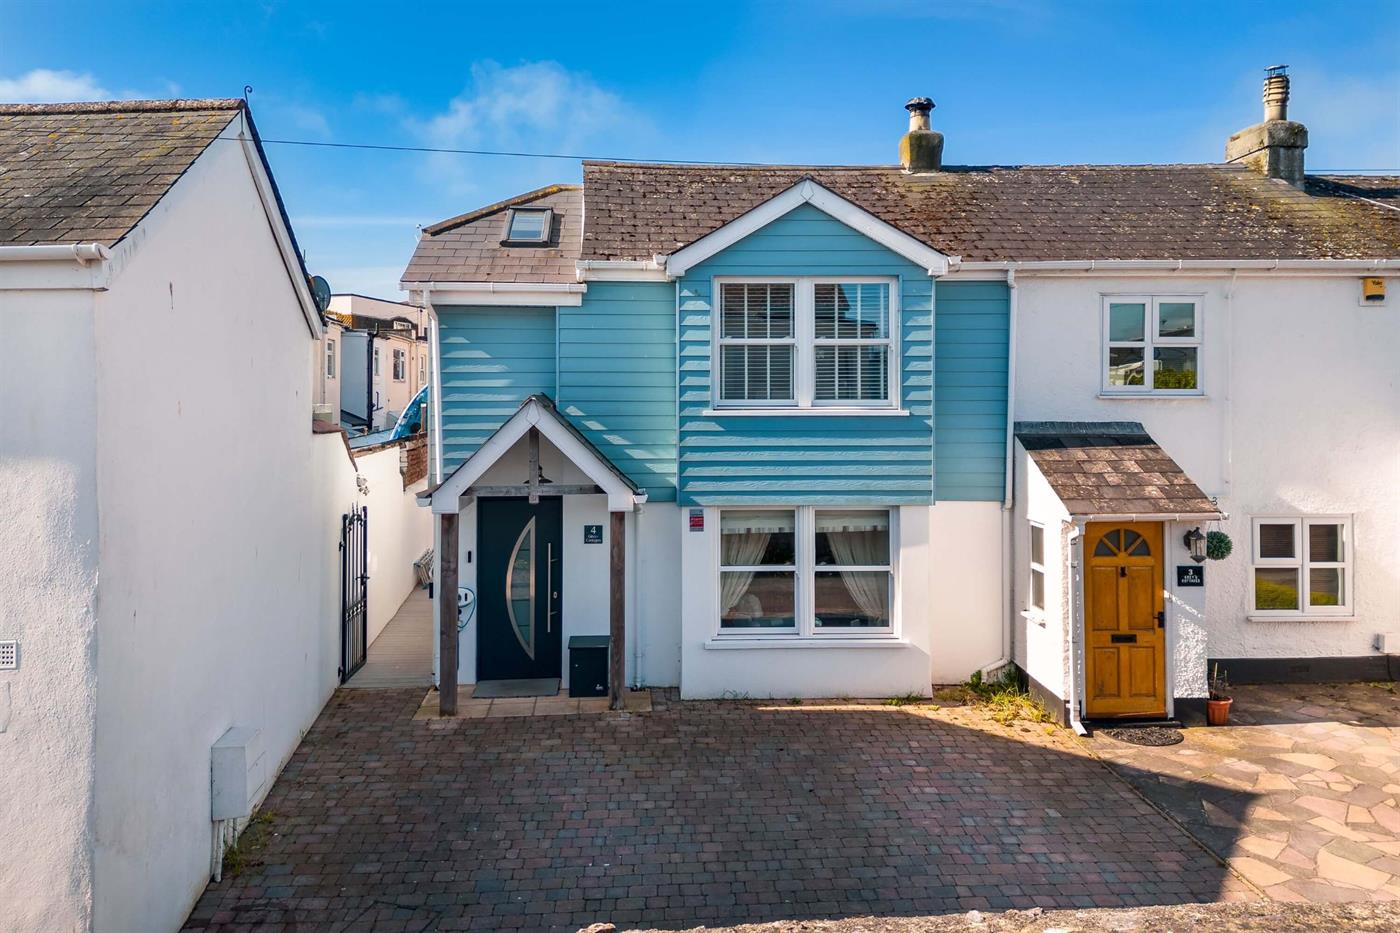 2 Bedroom End of Terrace House for Sale: Greys Cottages, Babbacombe Downs Road, Torquay, TQ1 3LR